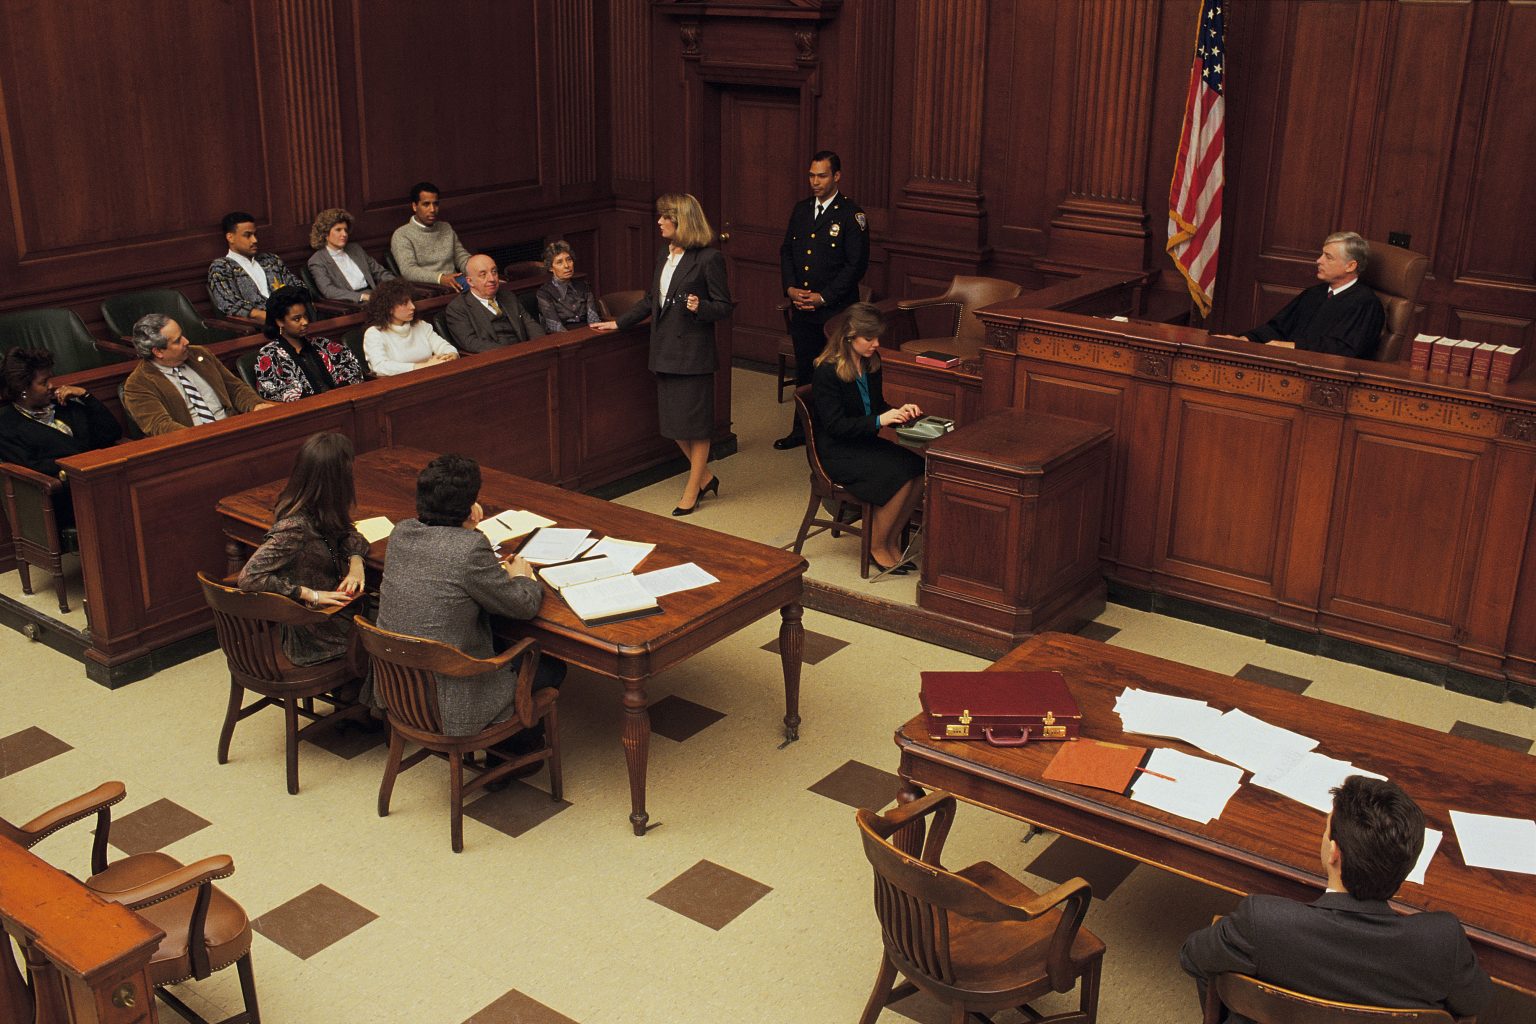 ‘Virtual court’ now in session across New York expands due to pandemic